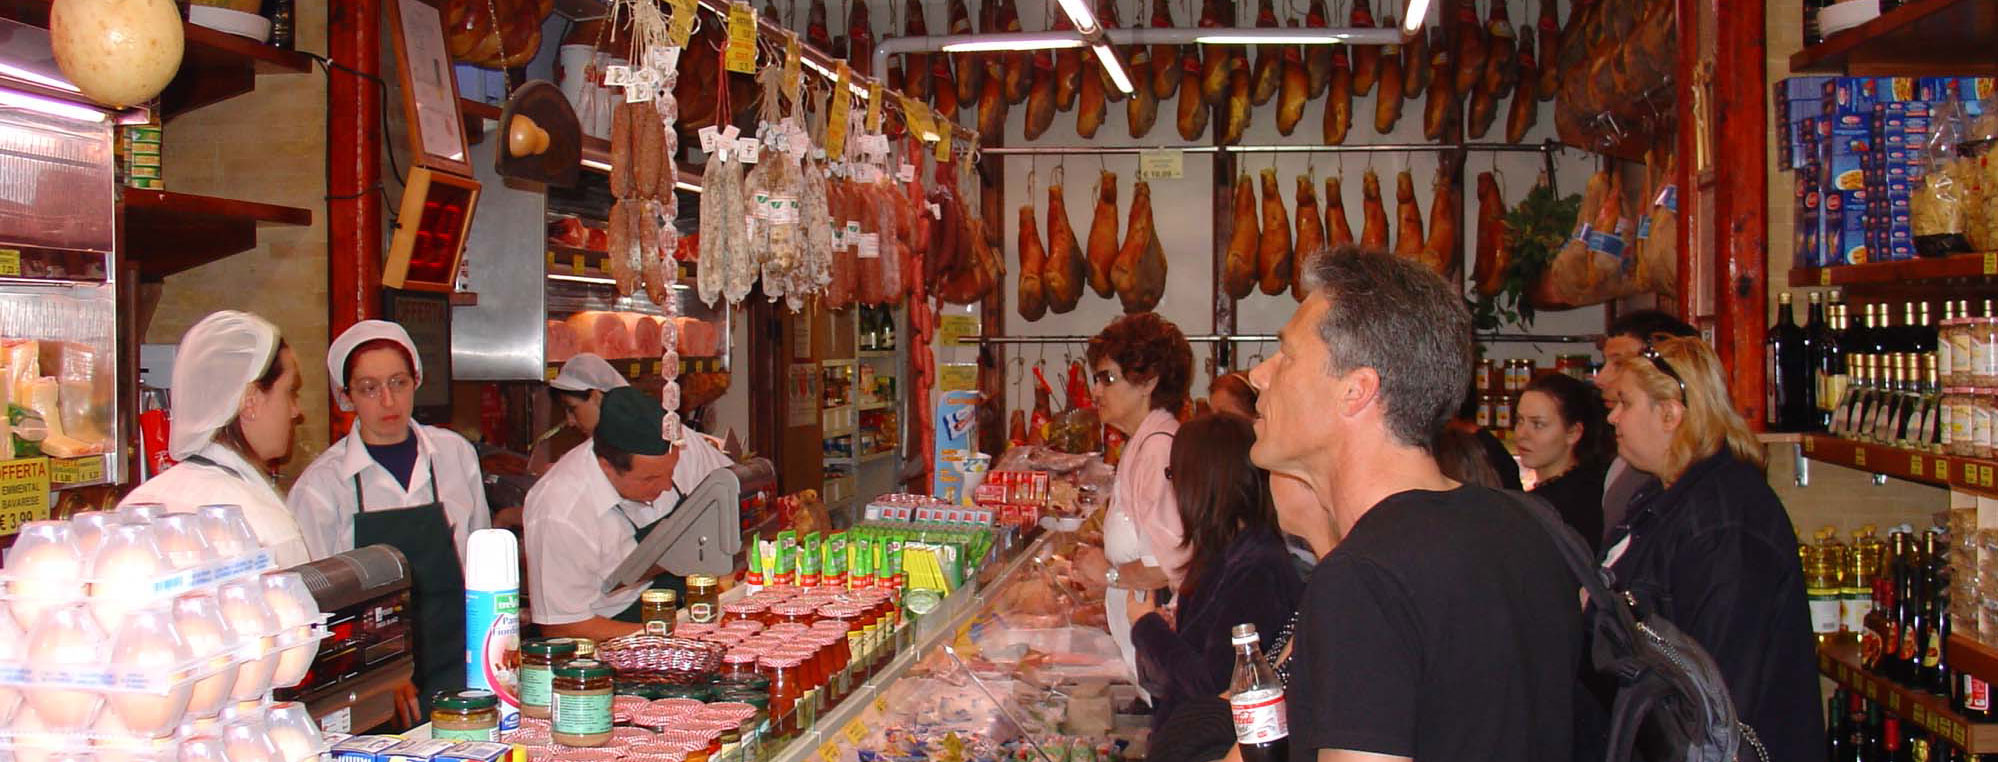 visit to local markets in Marche Italy